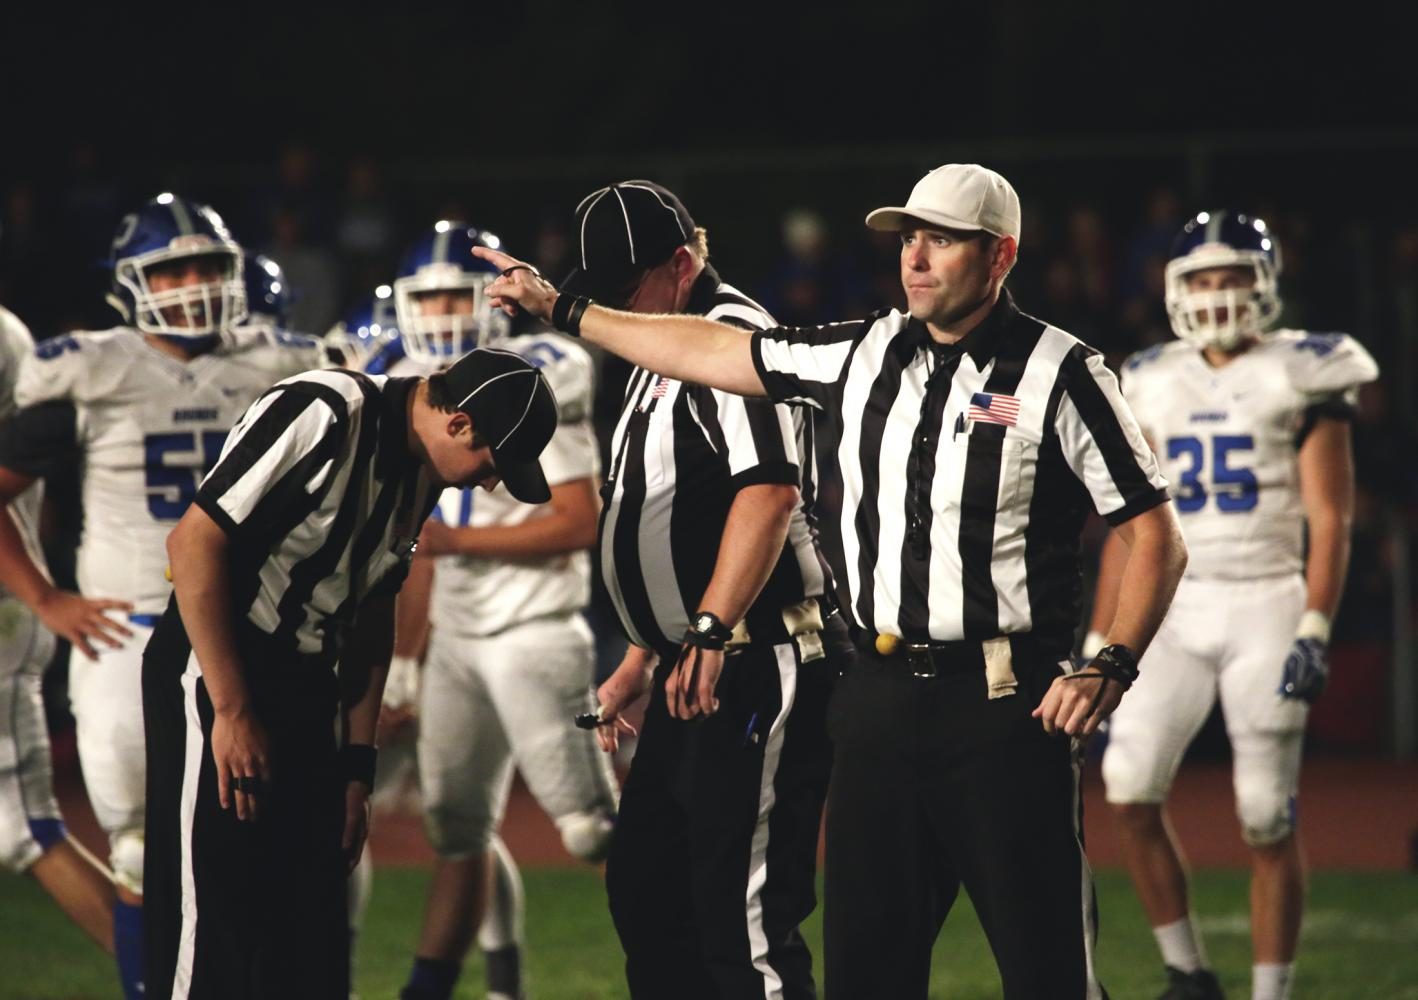 Referees come together for a flag in a Pullman High School football game.